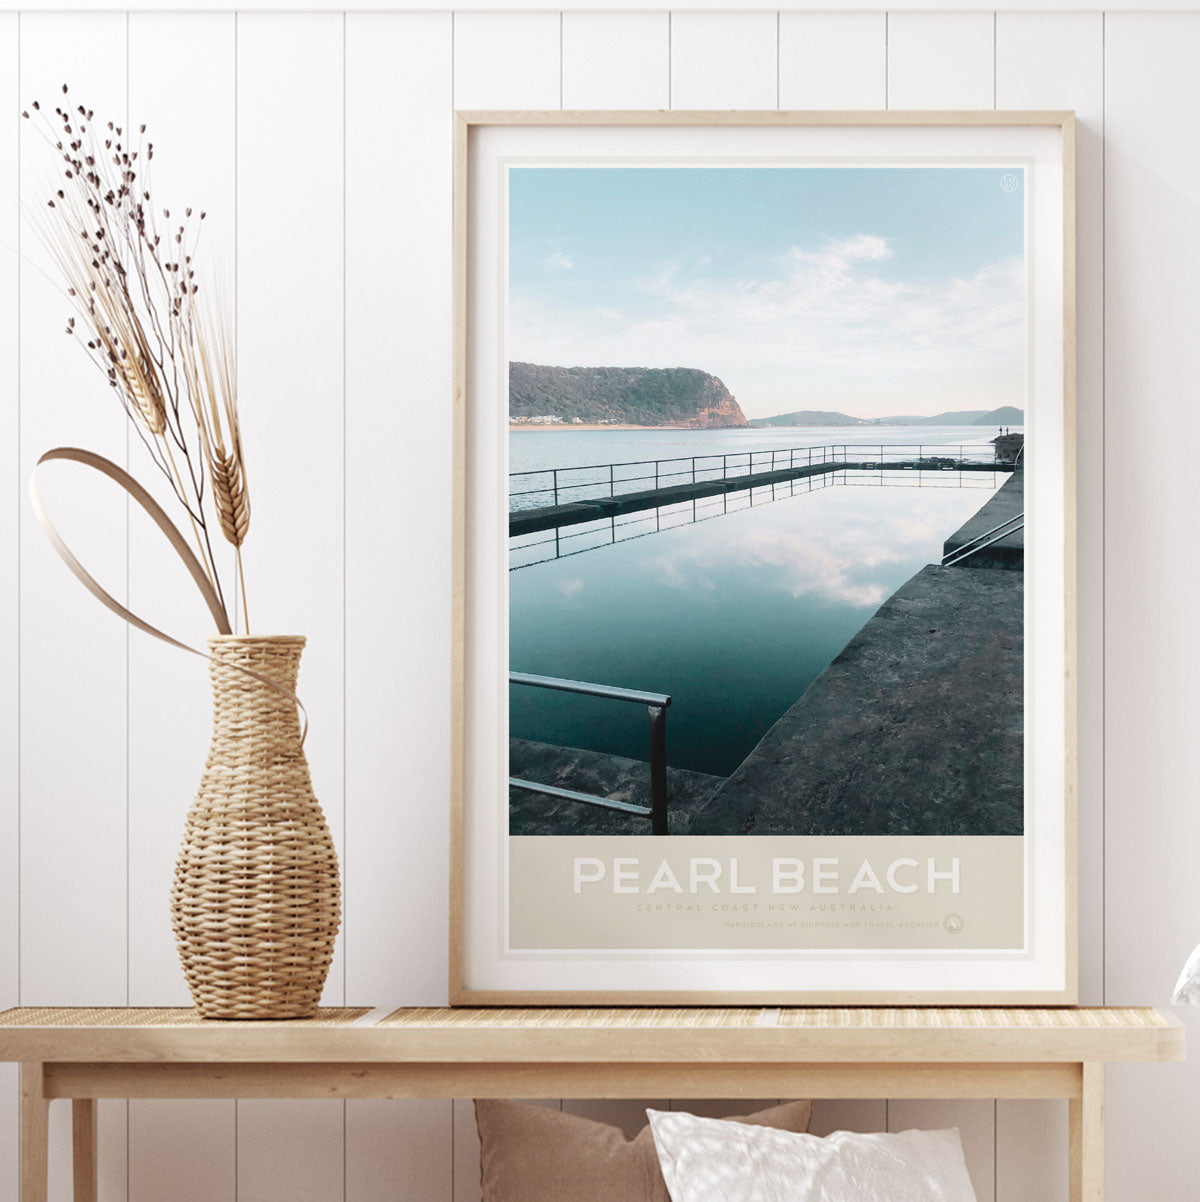 Pearl Beach NSW pool retro vintage poster print by Places We Luv